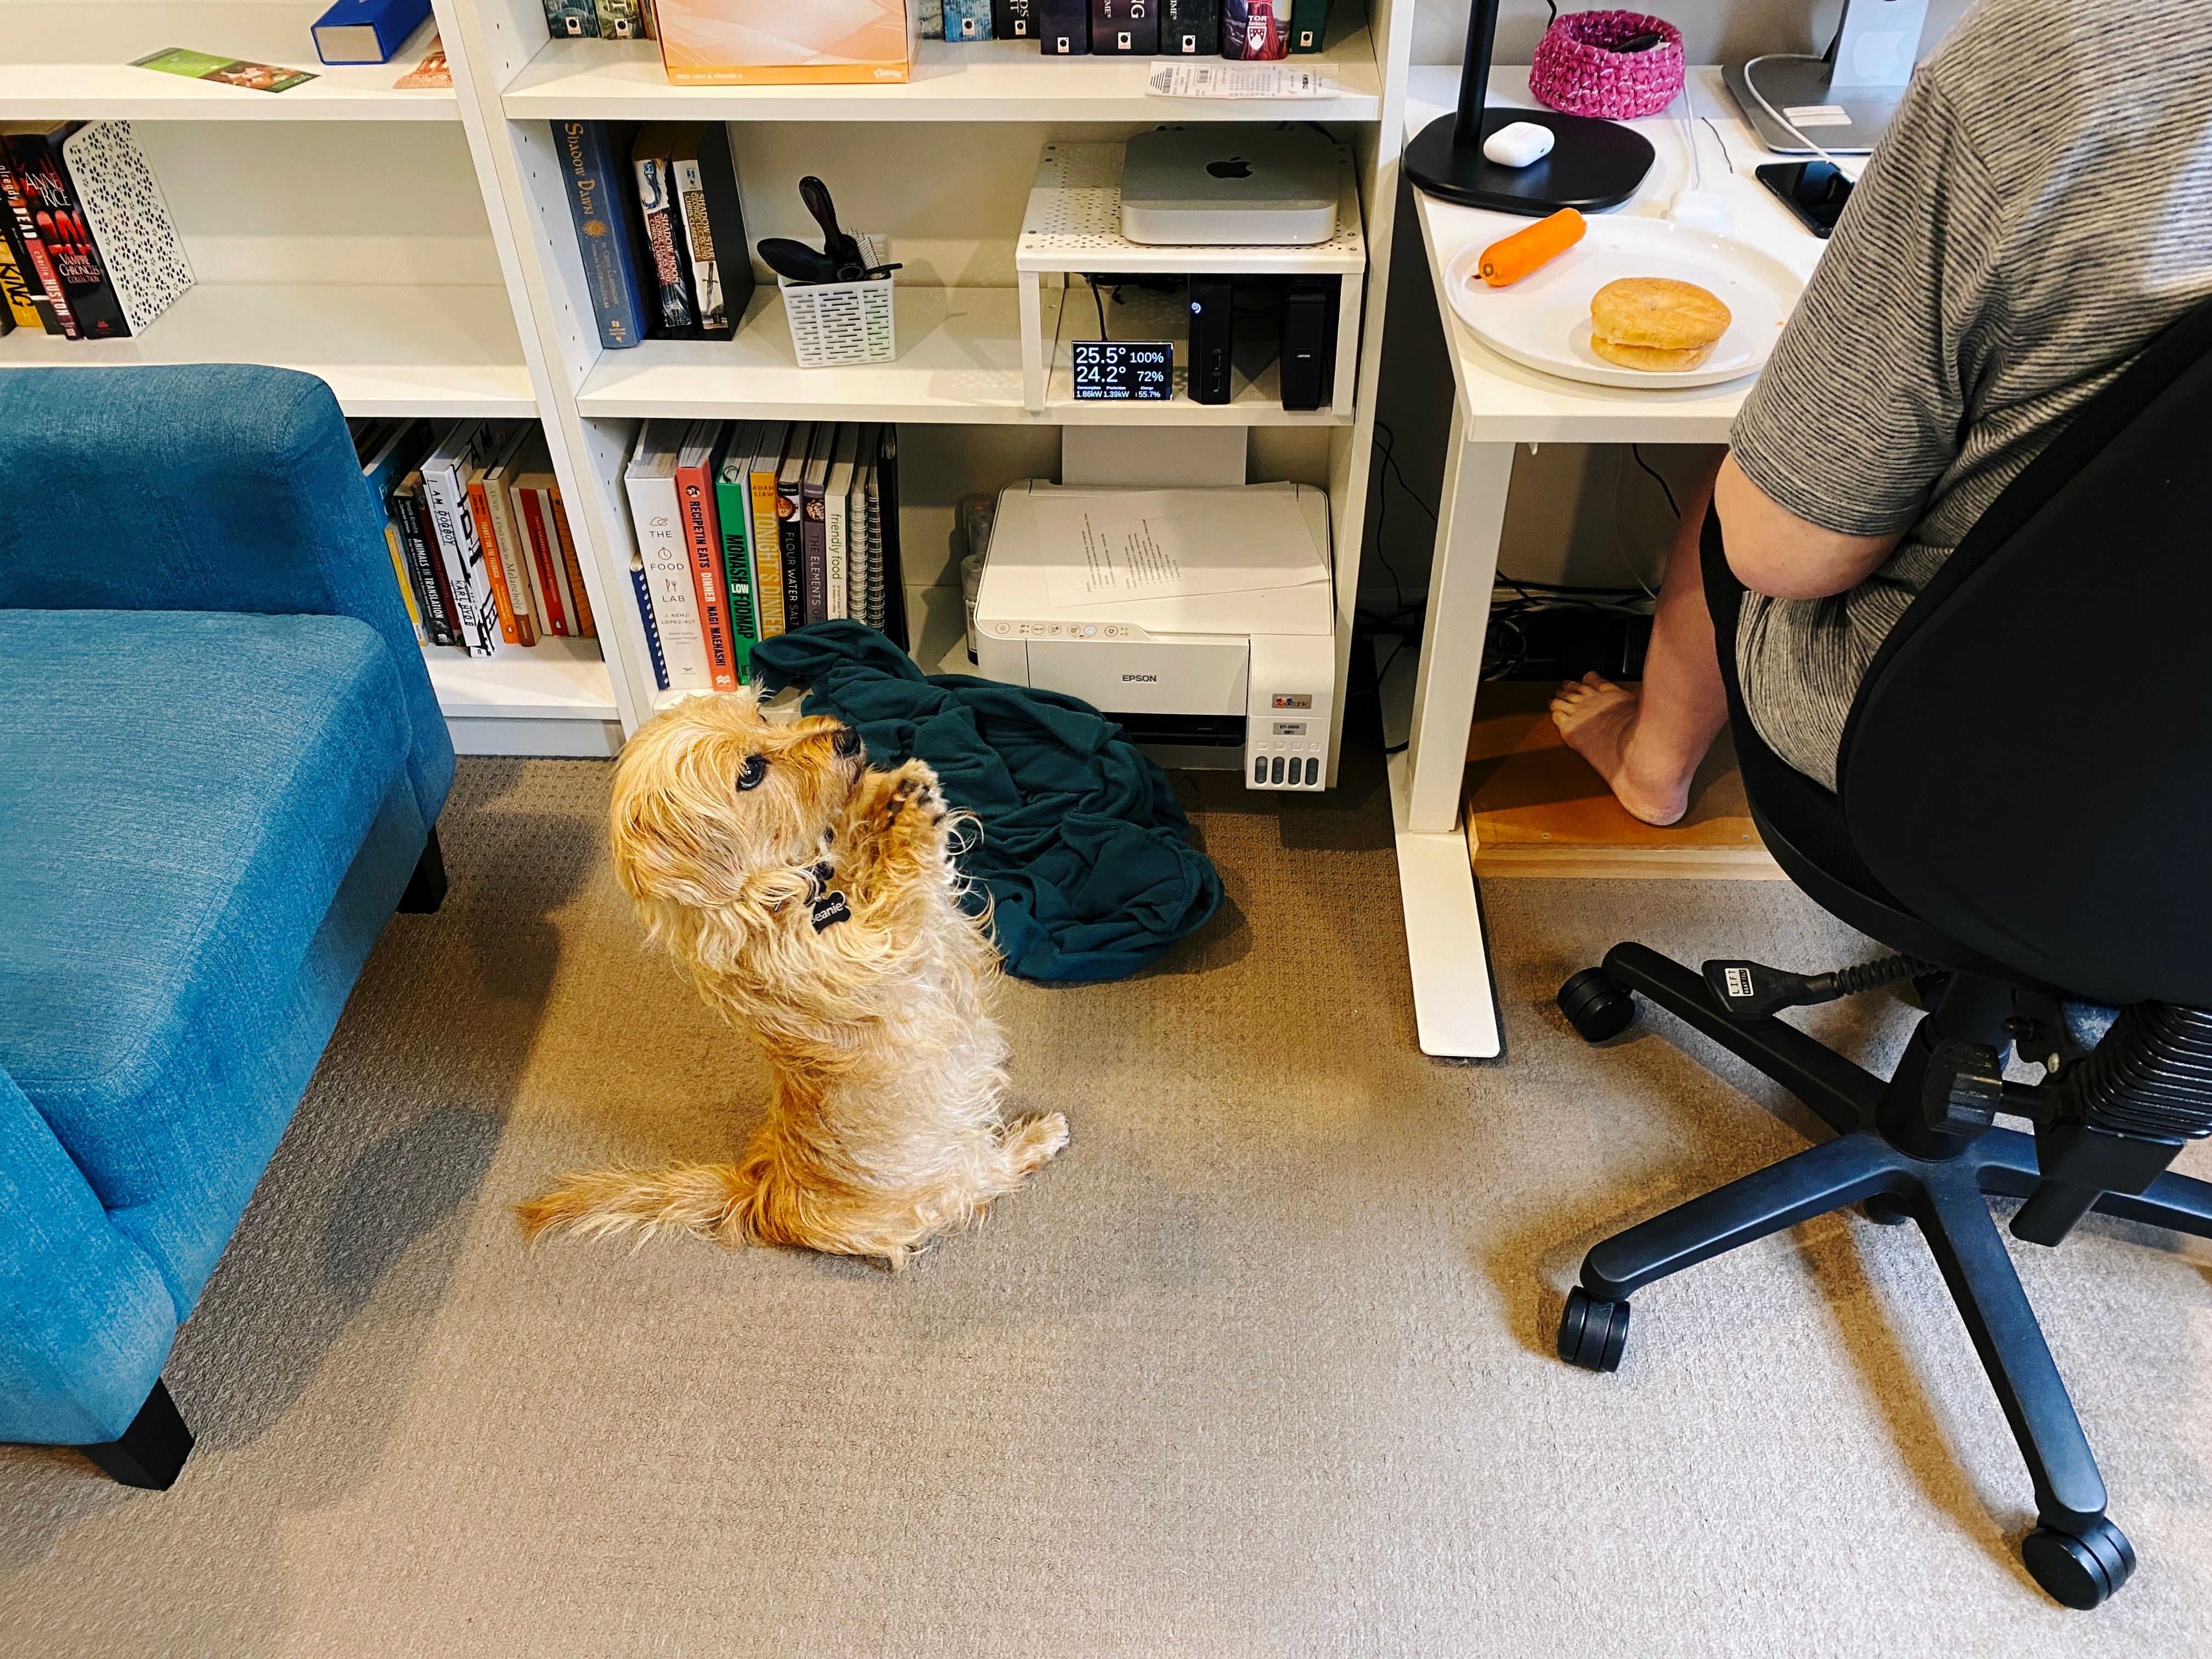 A photo of a small scruffy blonde dog sitting up on his haunches, in the middle of flailing his front paws at the person sitting in an office chair at the right of the photo. On the desk is a plate that has a bagel and a carrot on it.